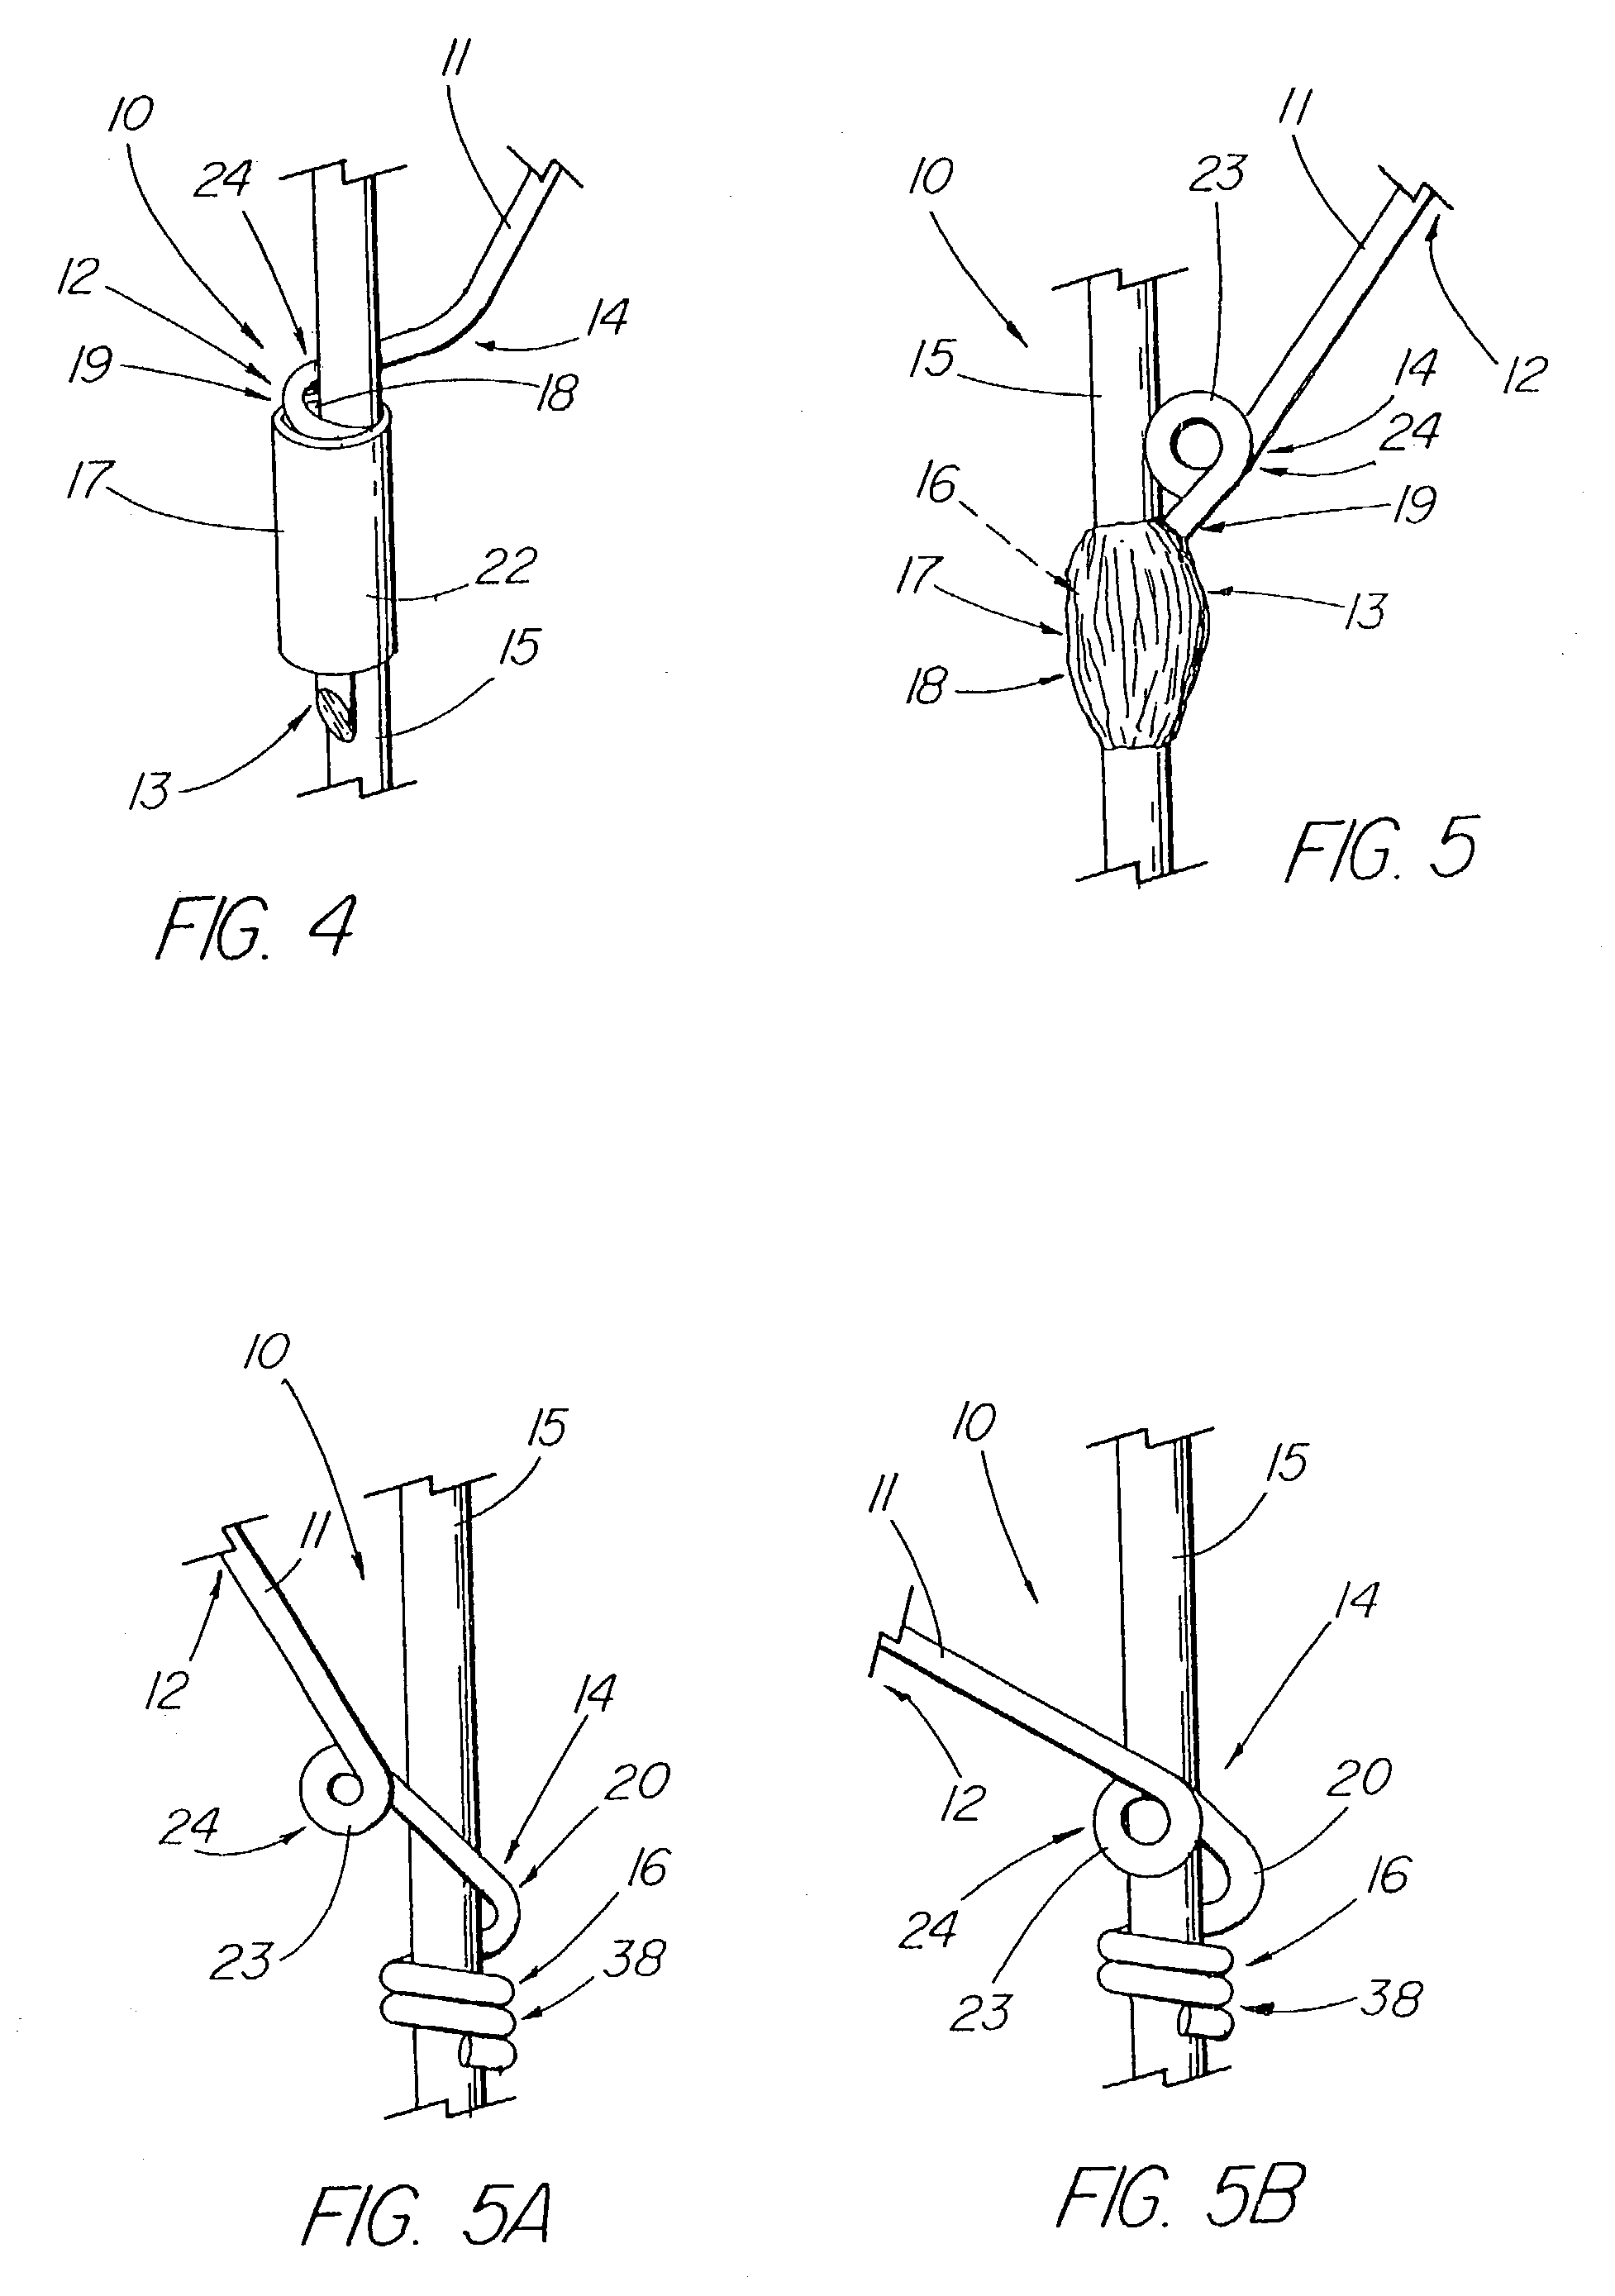 Flexible barb for anchoring a prosthesis